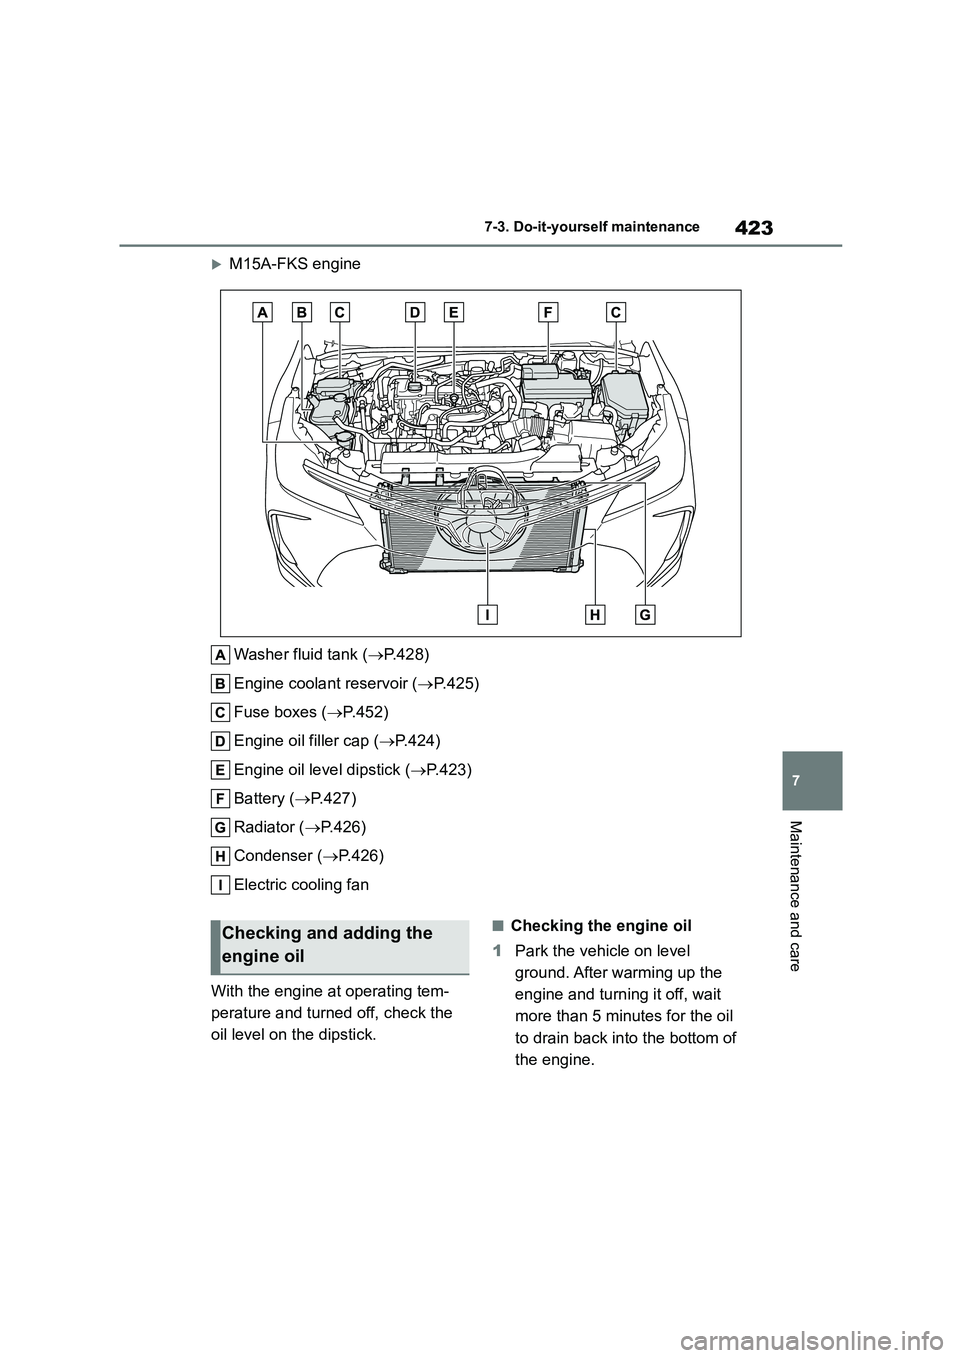 TOYOTA COROLLA 2022  Owners Manual (in English) 423
7 
7-3. Do-it-yourself maintenance
Maintenance and care
M15A-FKS engine 
Washer fluid tank ( P.428) 
Engine coolant reservoir ( P. 4 2 5 ) 
Fuse boxes ( P.452) 
Engine oil filler cap (